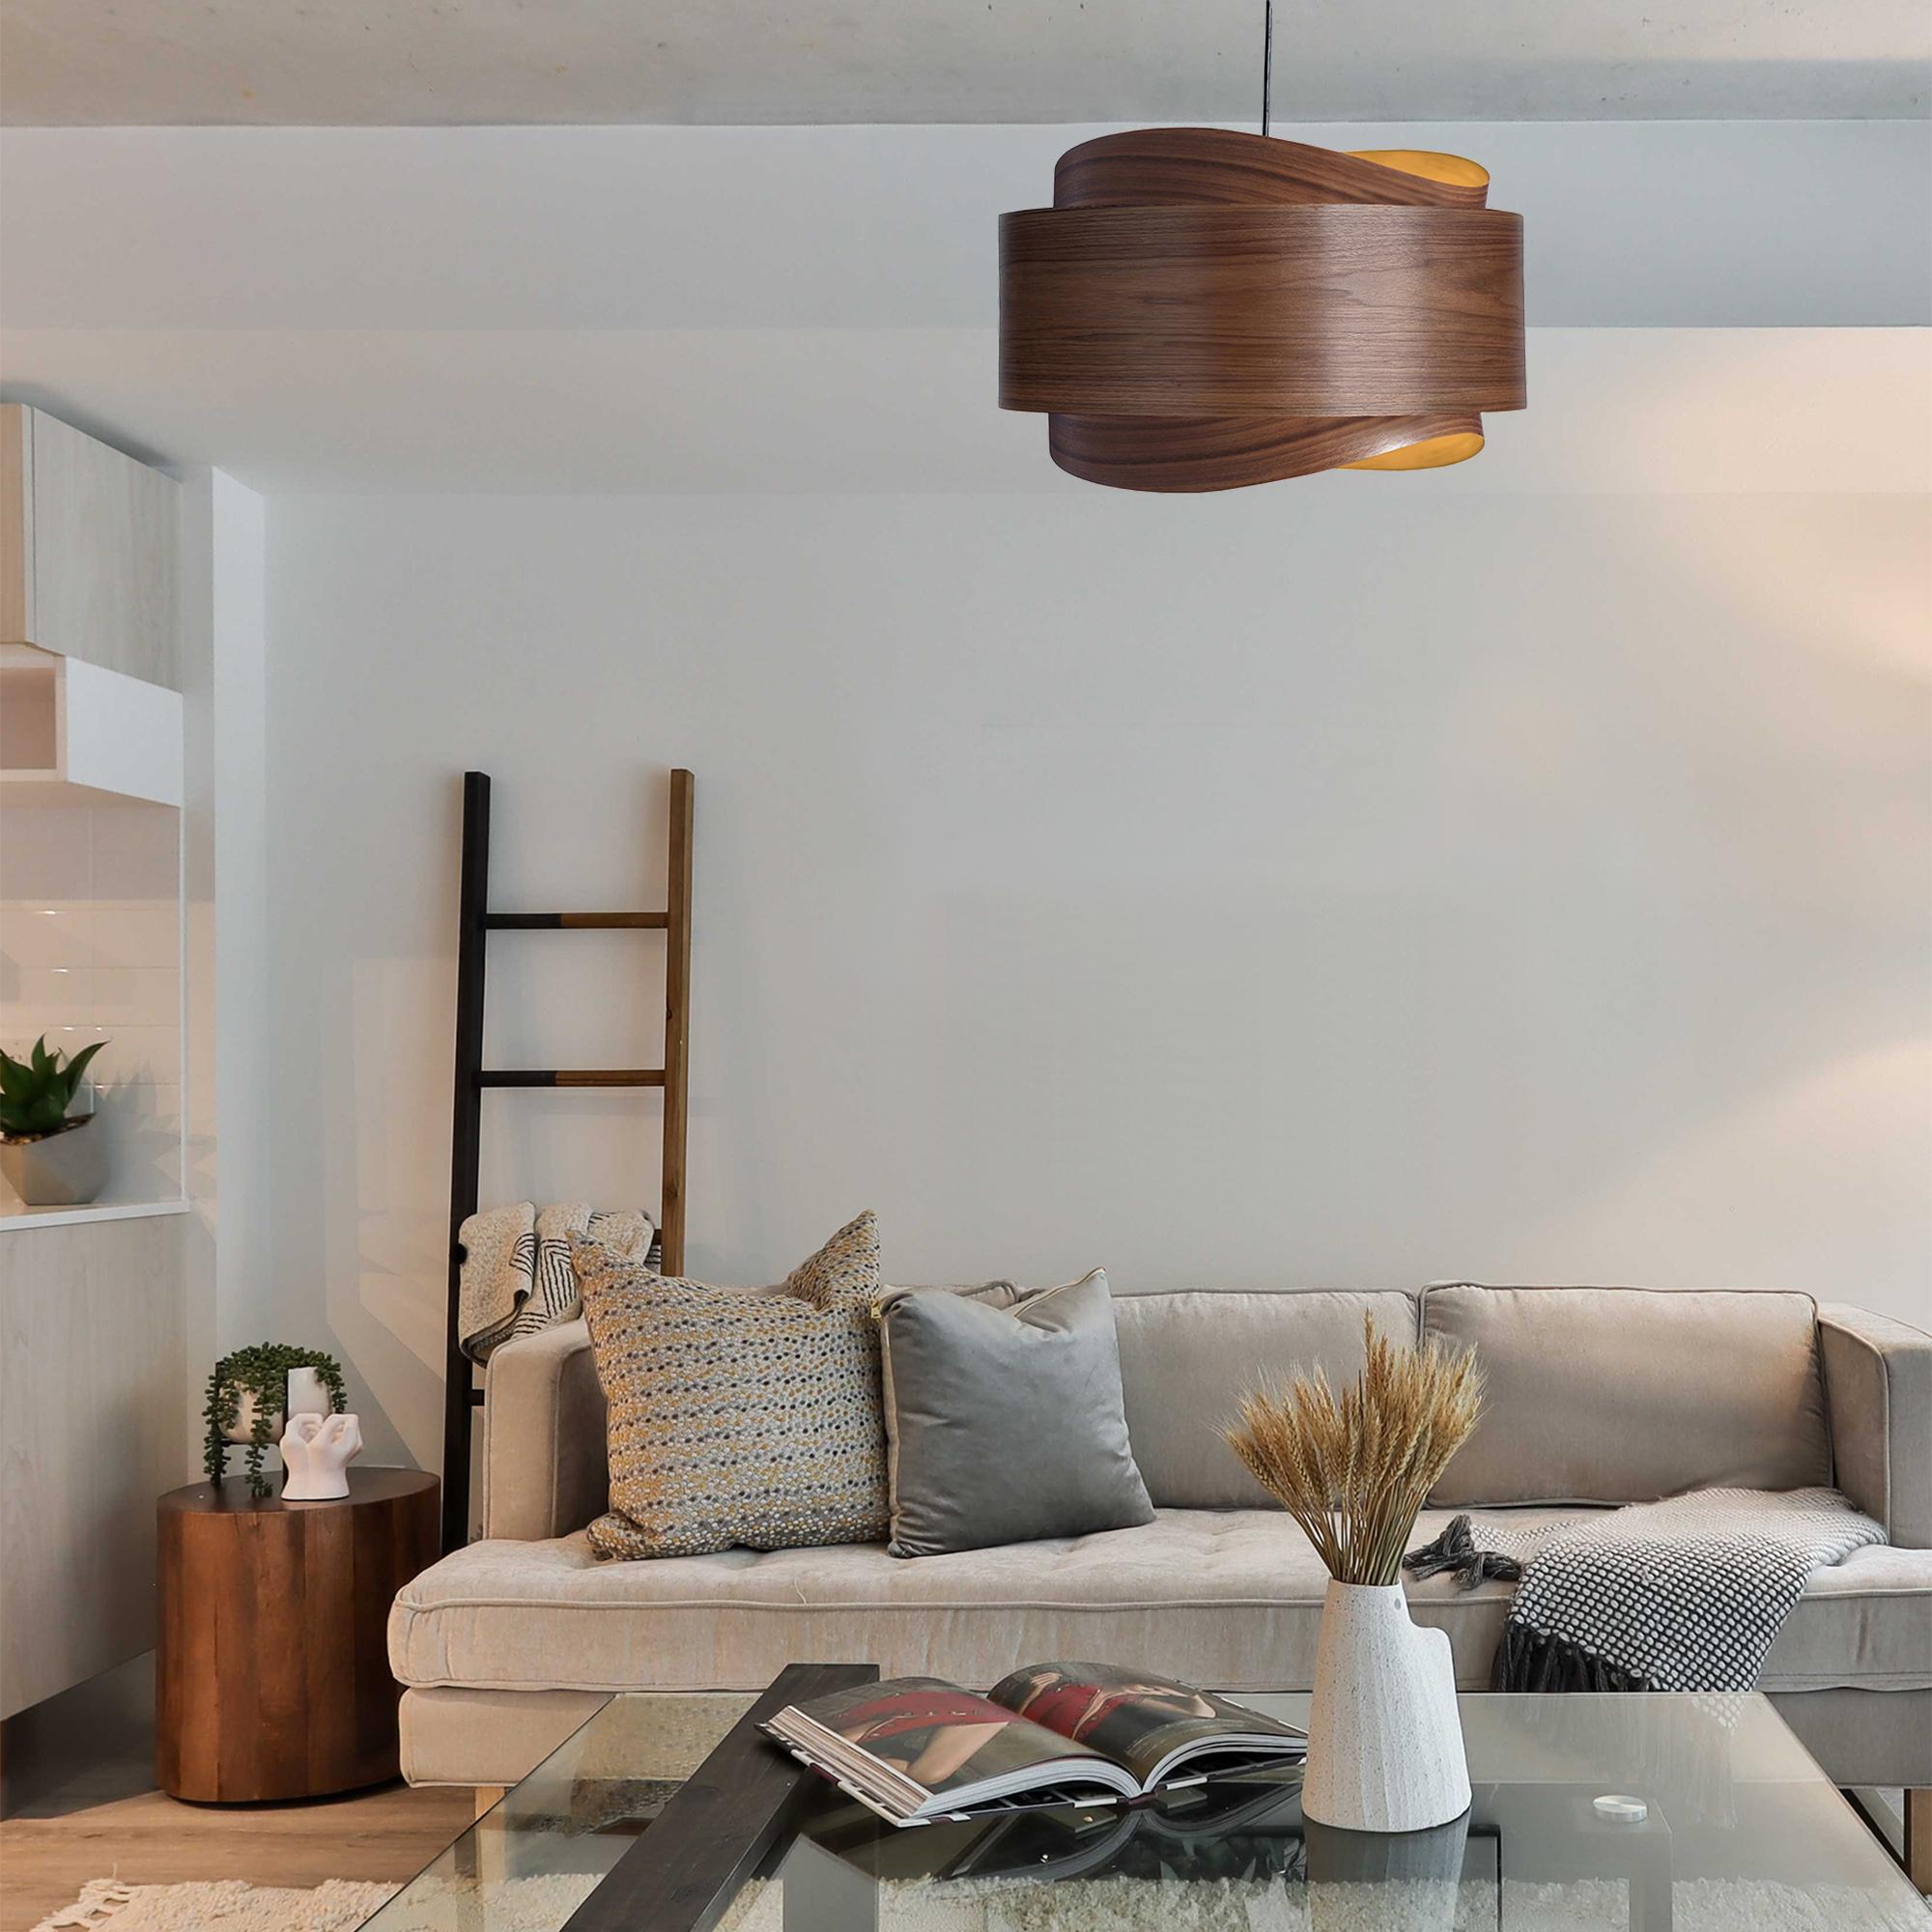 The BOWEN light fixture is a stunning example of contemporary Mid-Century Modern design. With its minimalist silhouette, warm walnut tones, and unique shape, this pendant light is sure to add a touch of sophistication to any space.

The BOWEN light